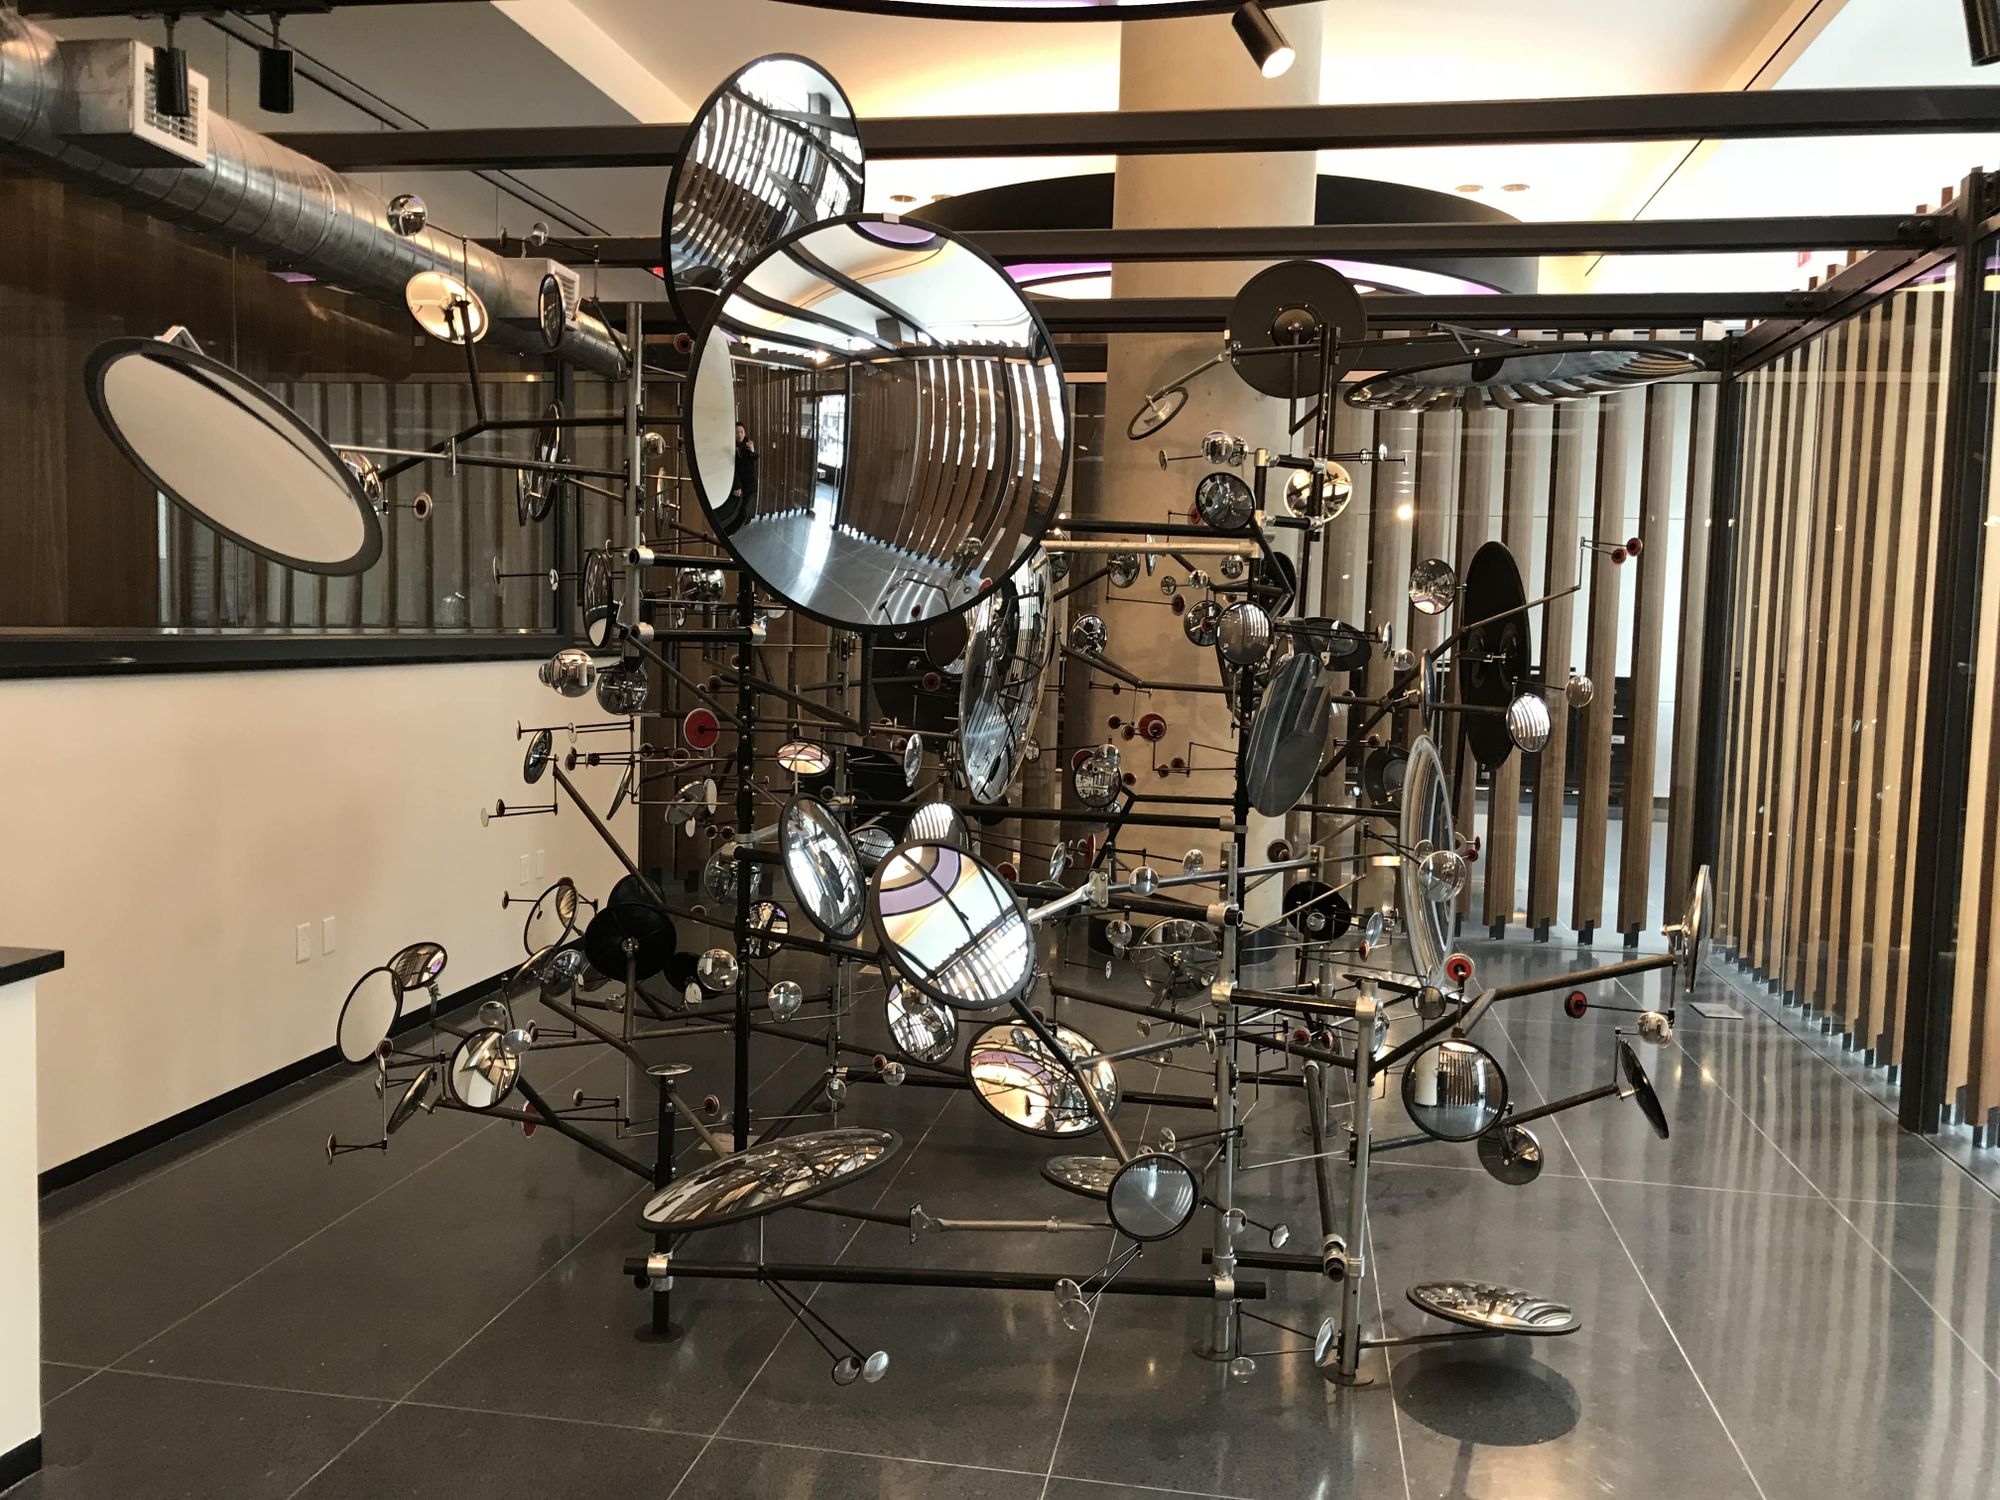 Brooklyn-Based Artist’s ‘Watching Machine’ Sculpture On View At 33 Bond